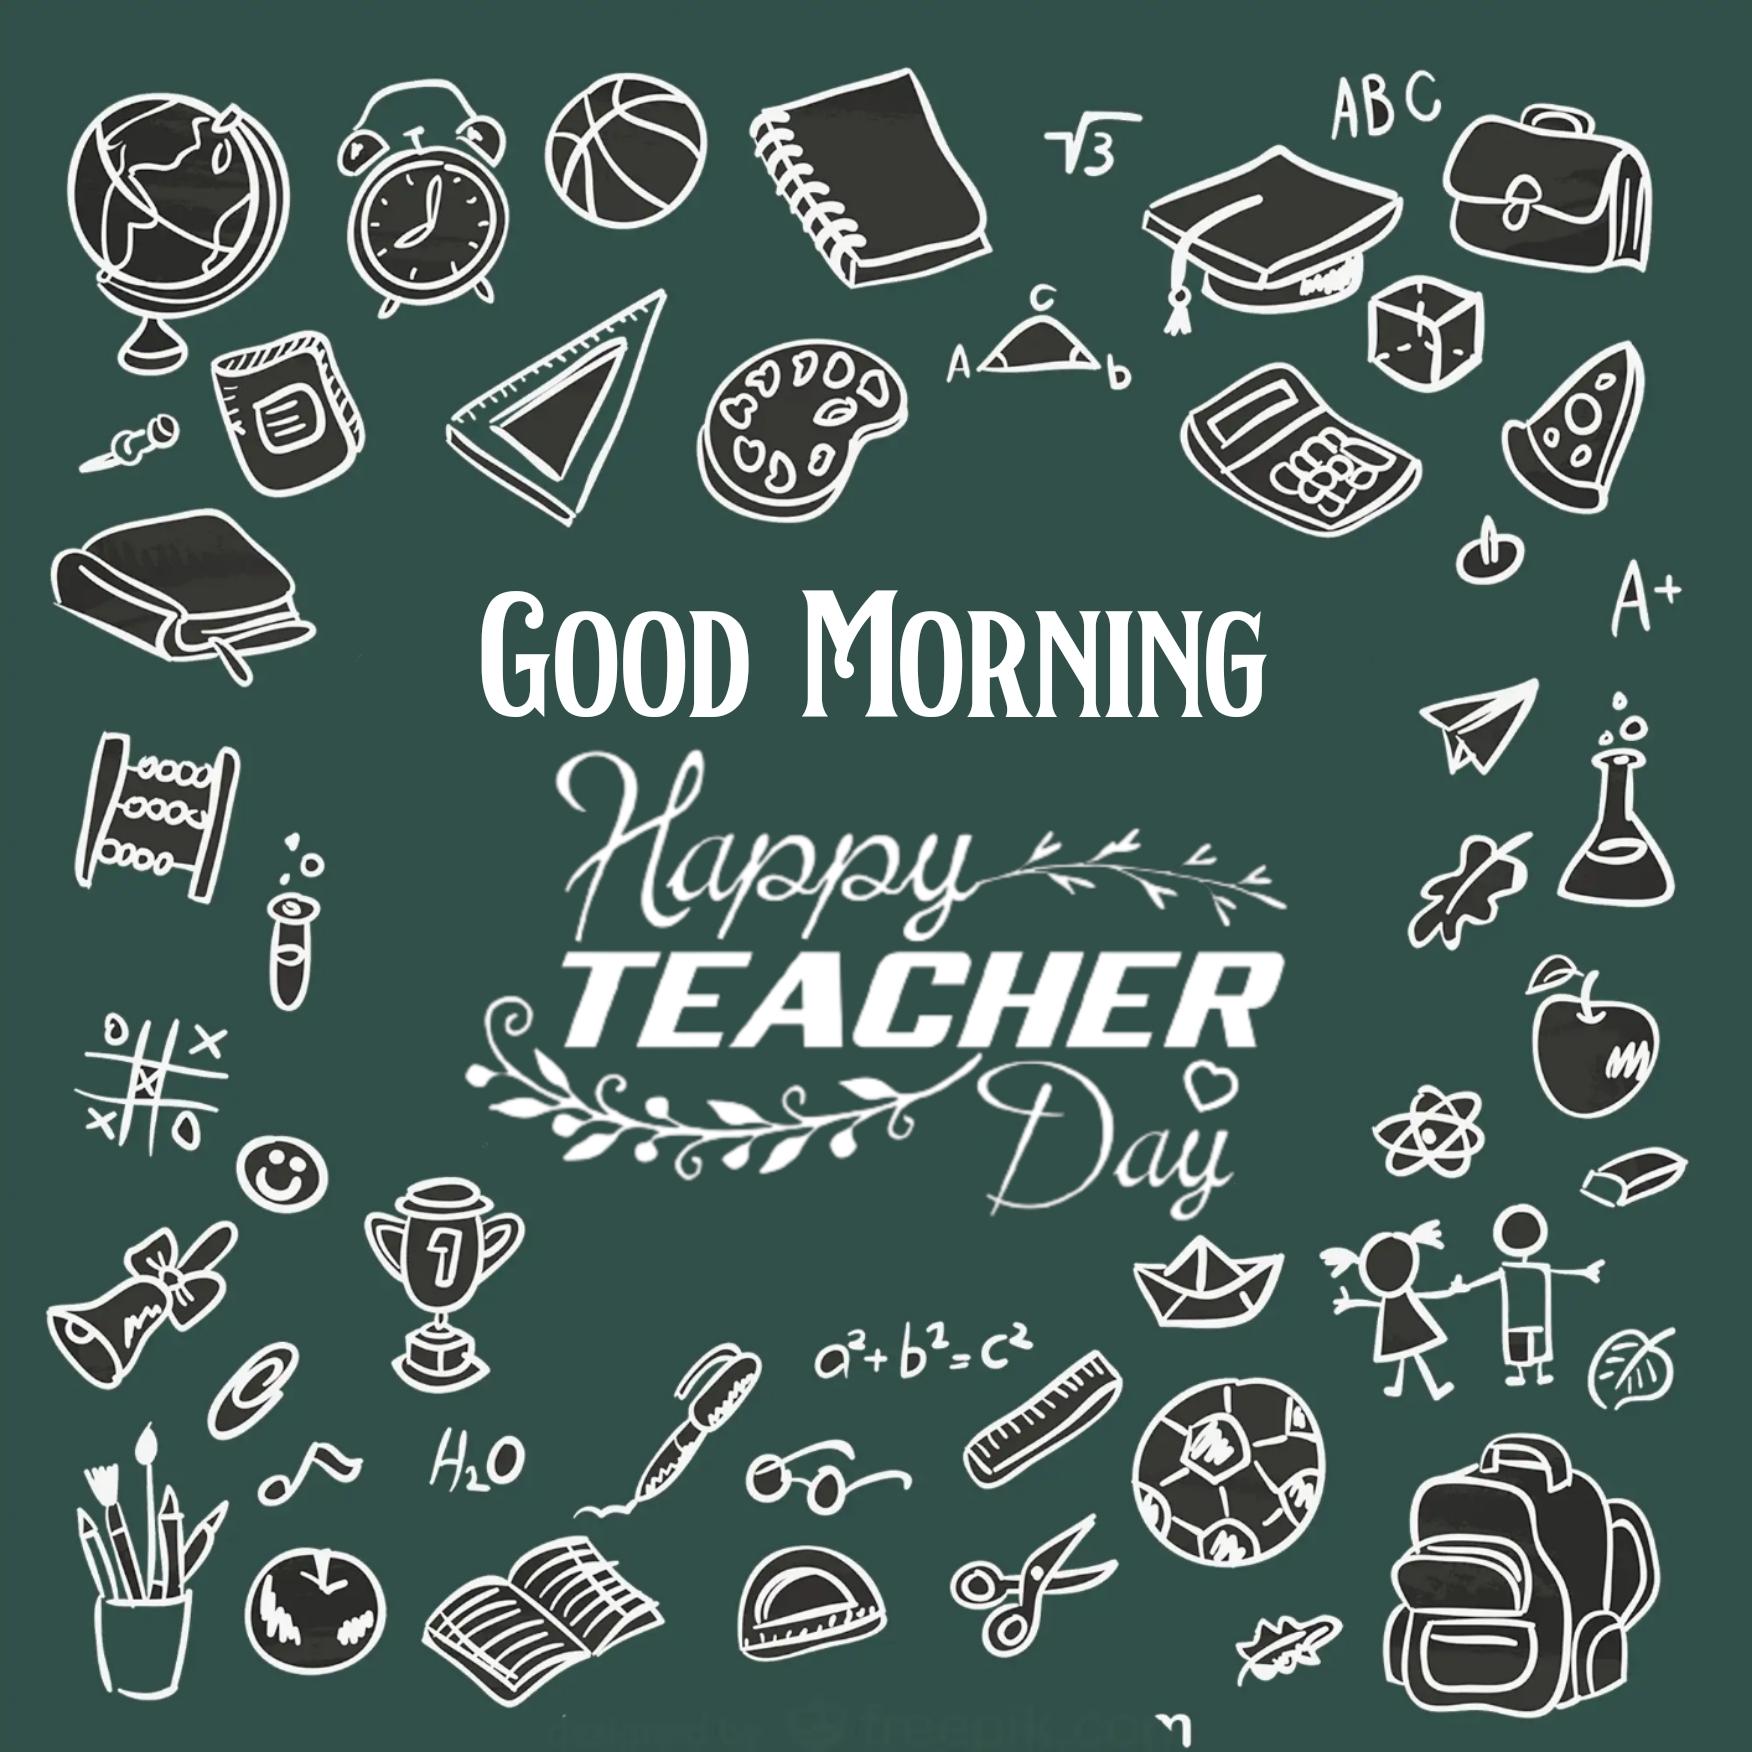 Happy Teachers Day Good Morning Images